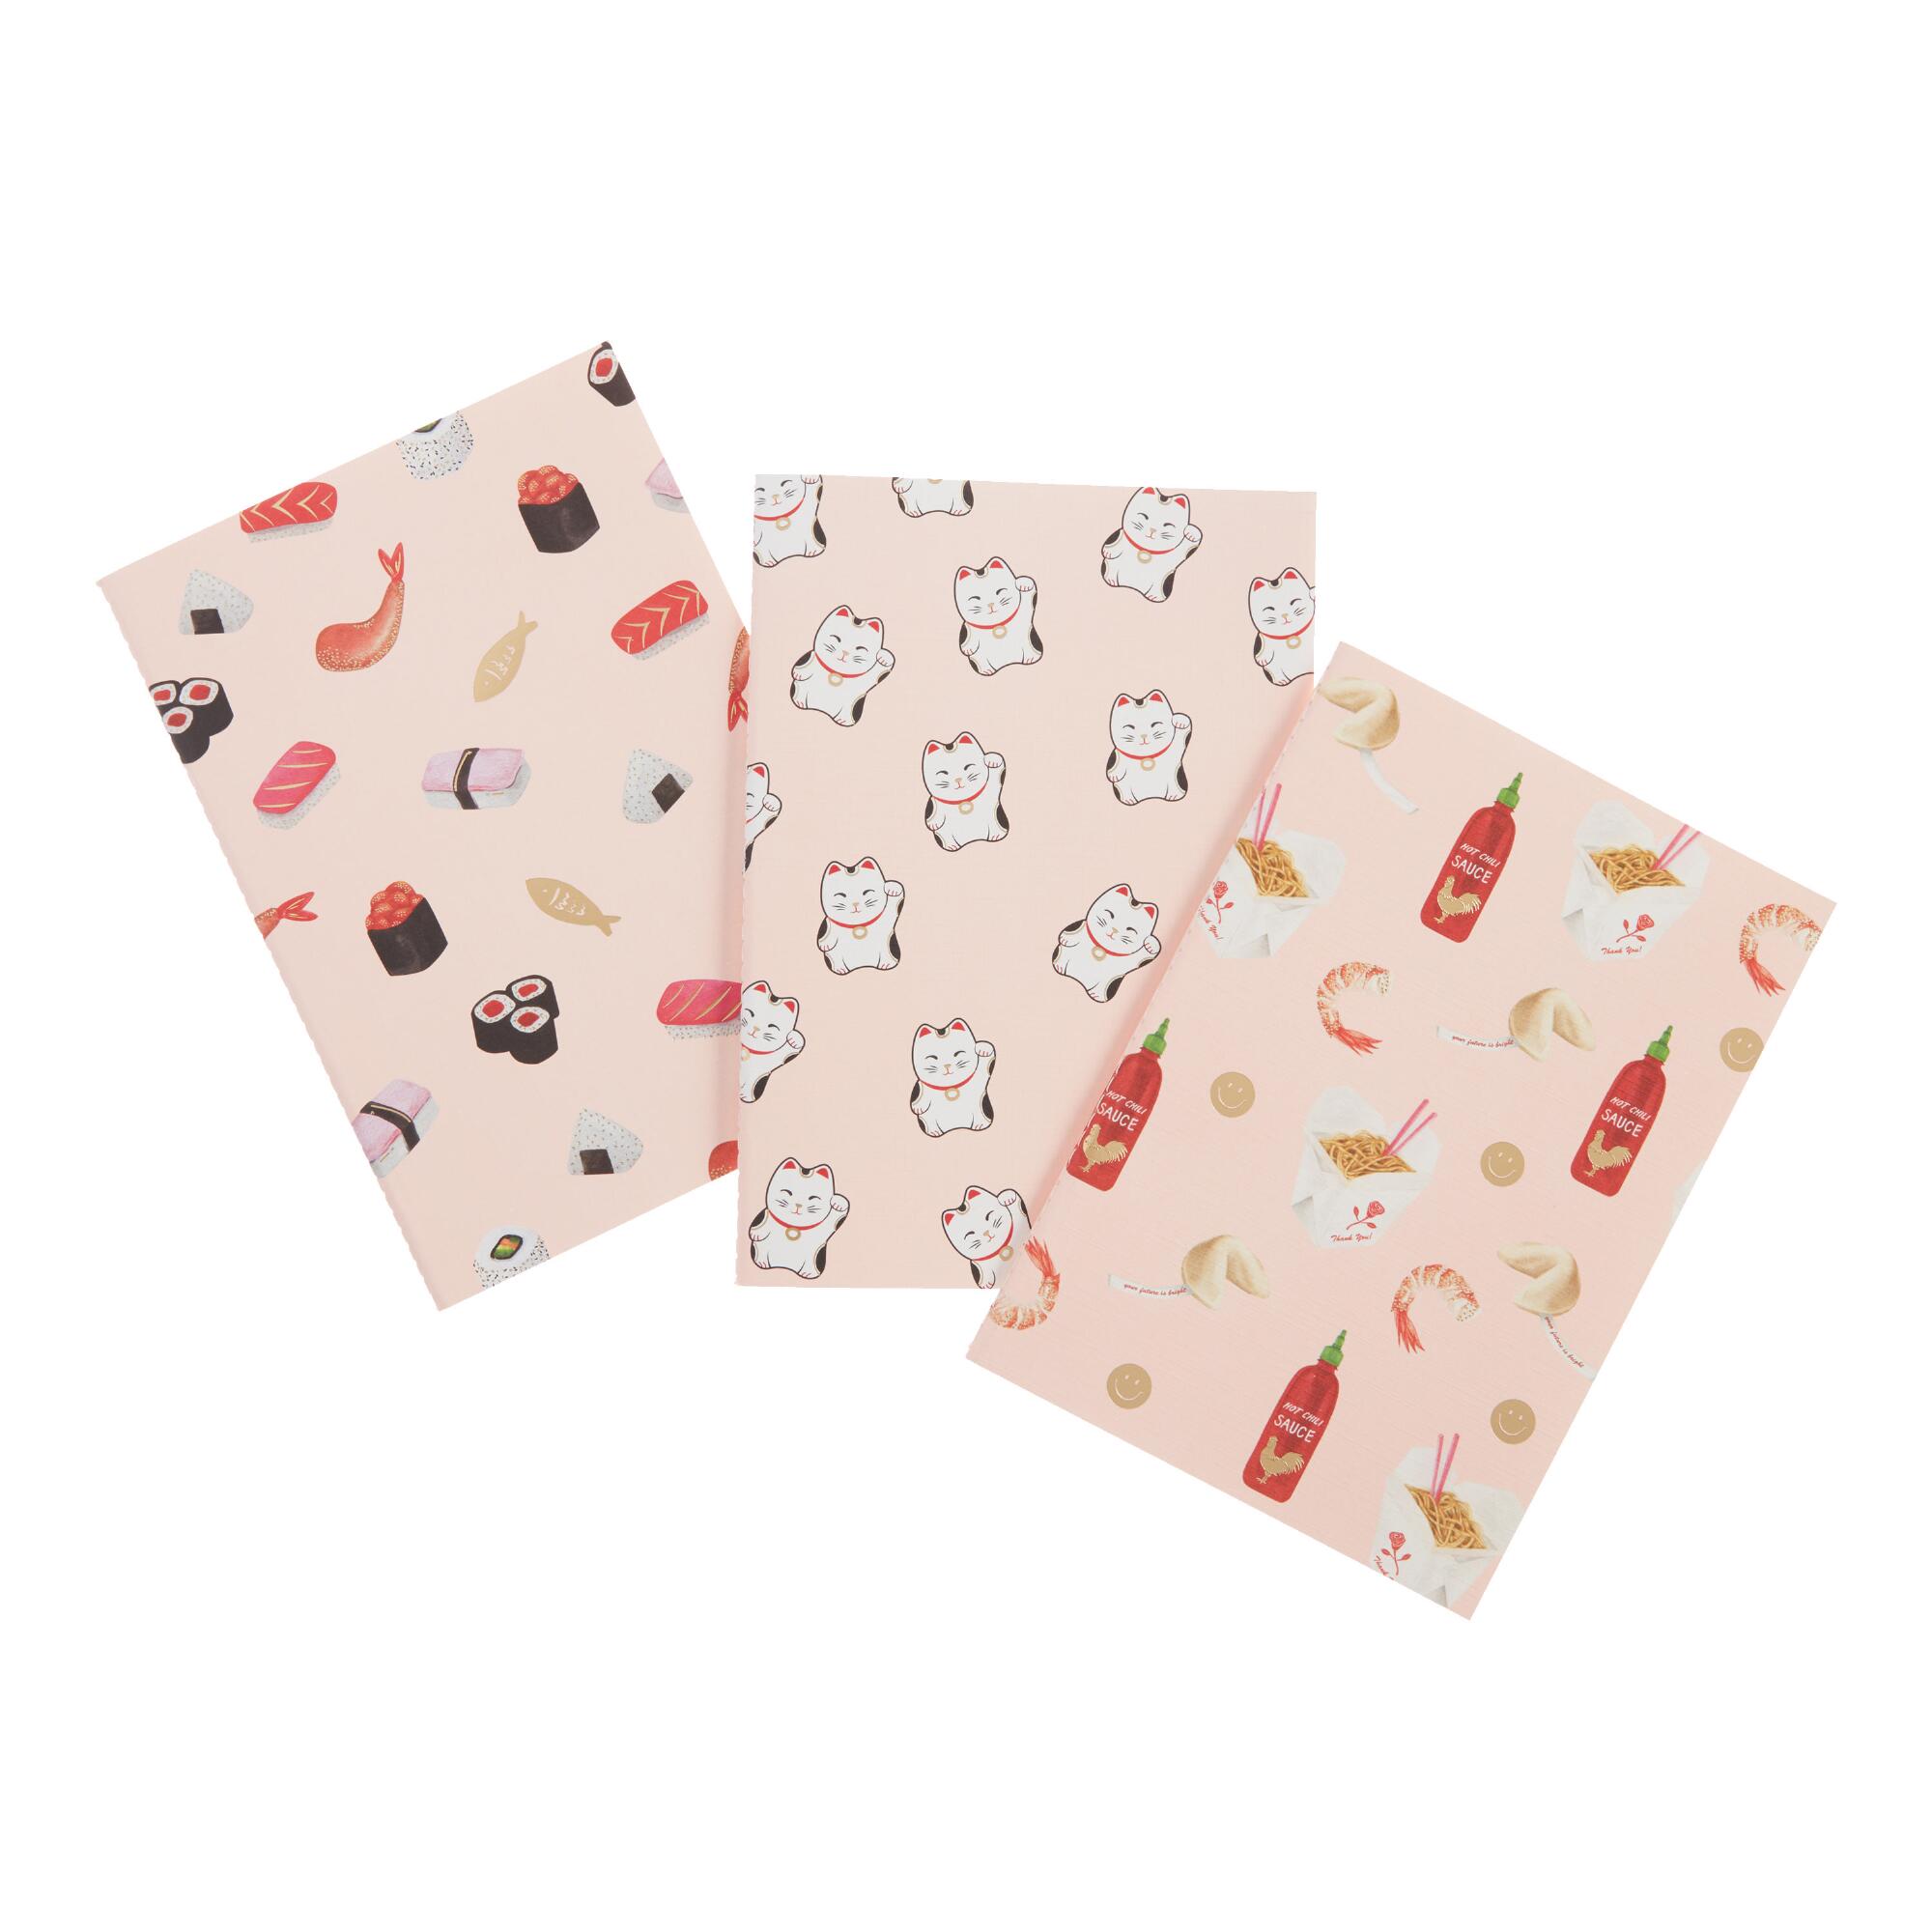 Takeout, Sushi And Lucky Cat Journals 3 Pack by World Market